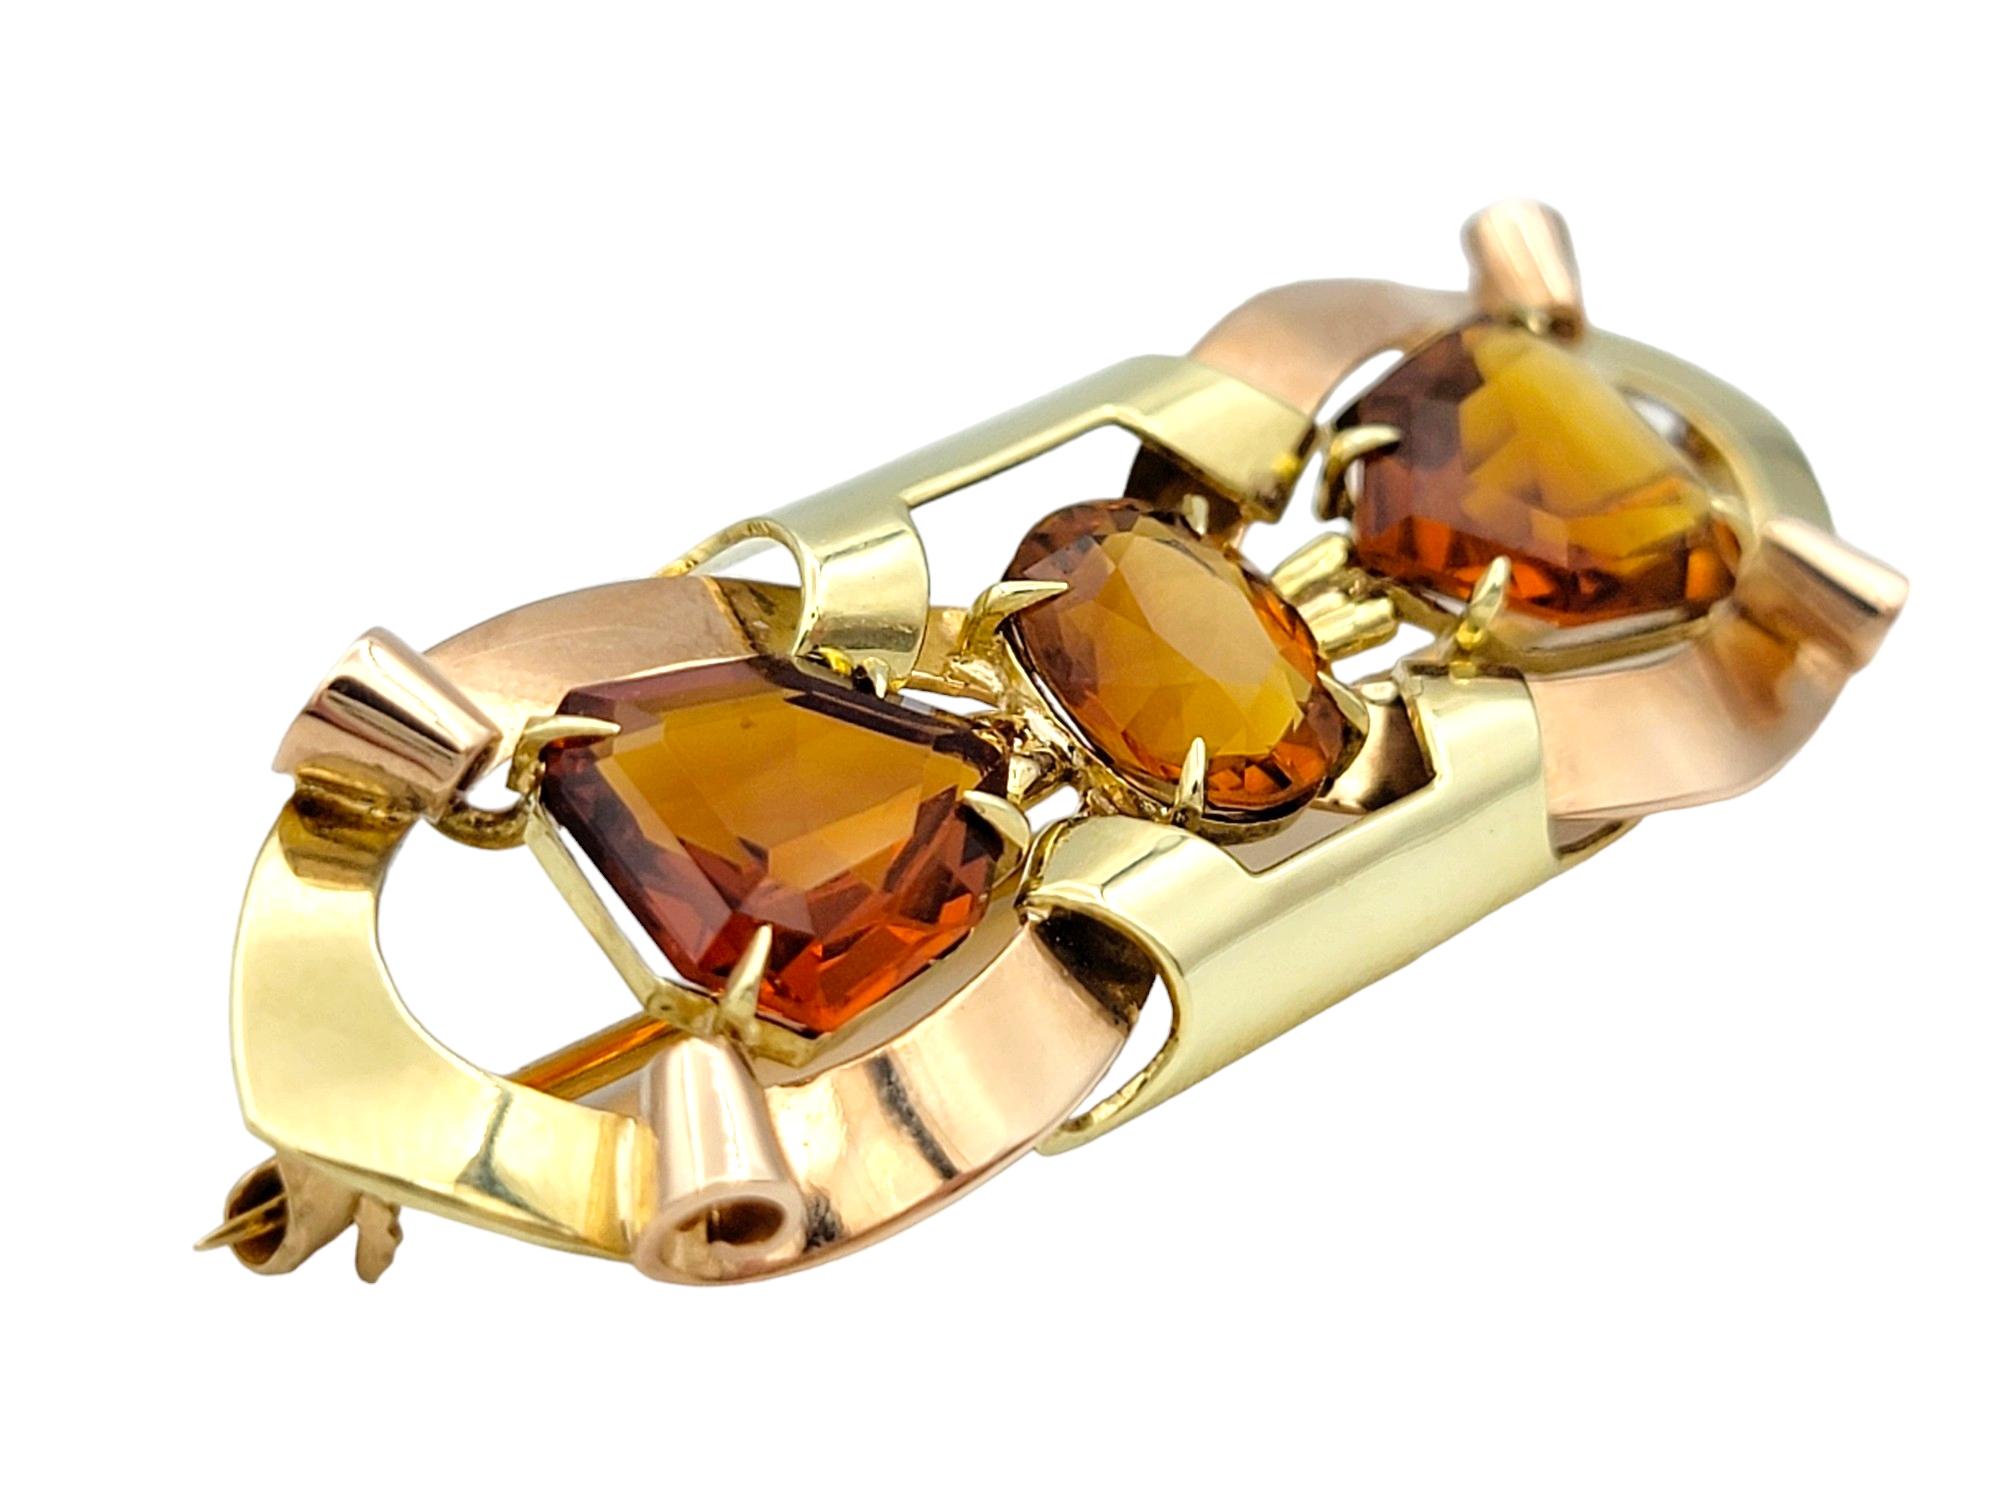 This gorgeous Tiffany & Co. vintage ribbon design brooch exudes classic elegance and timeless charm. Crafted from luxurious 14 karat yellow and rose gold, this exquisite piece features a beautifully detailed ribbon motif adorned with vibrant citrine